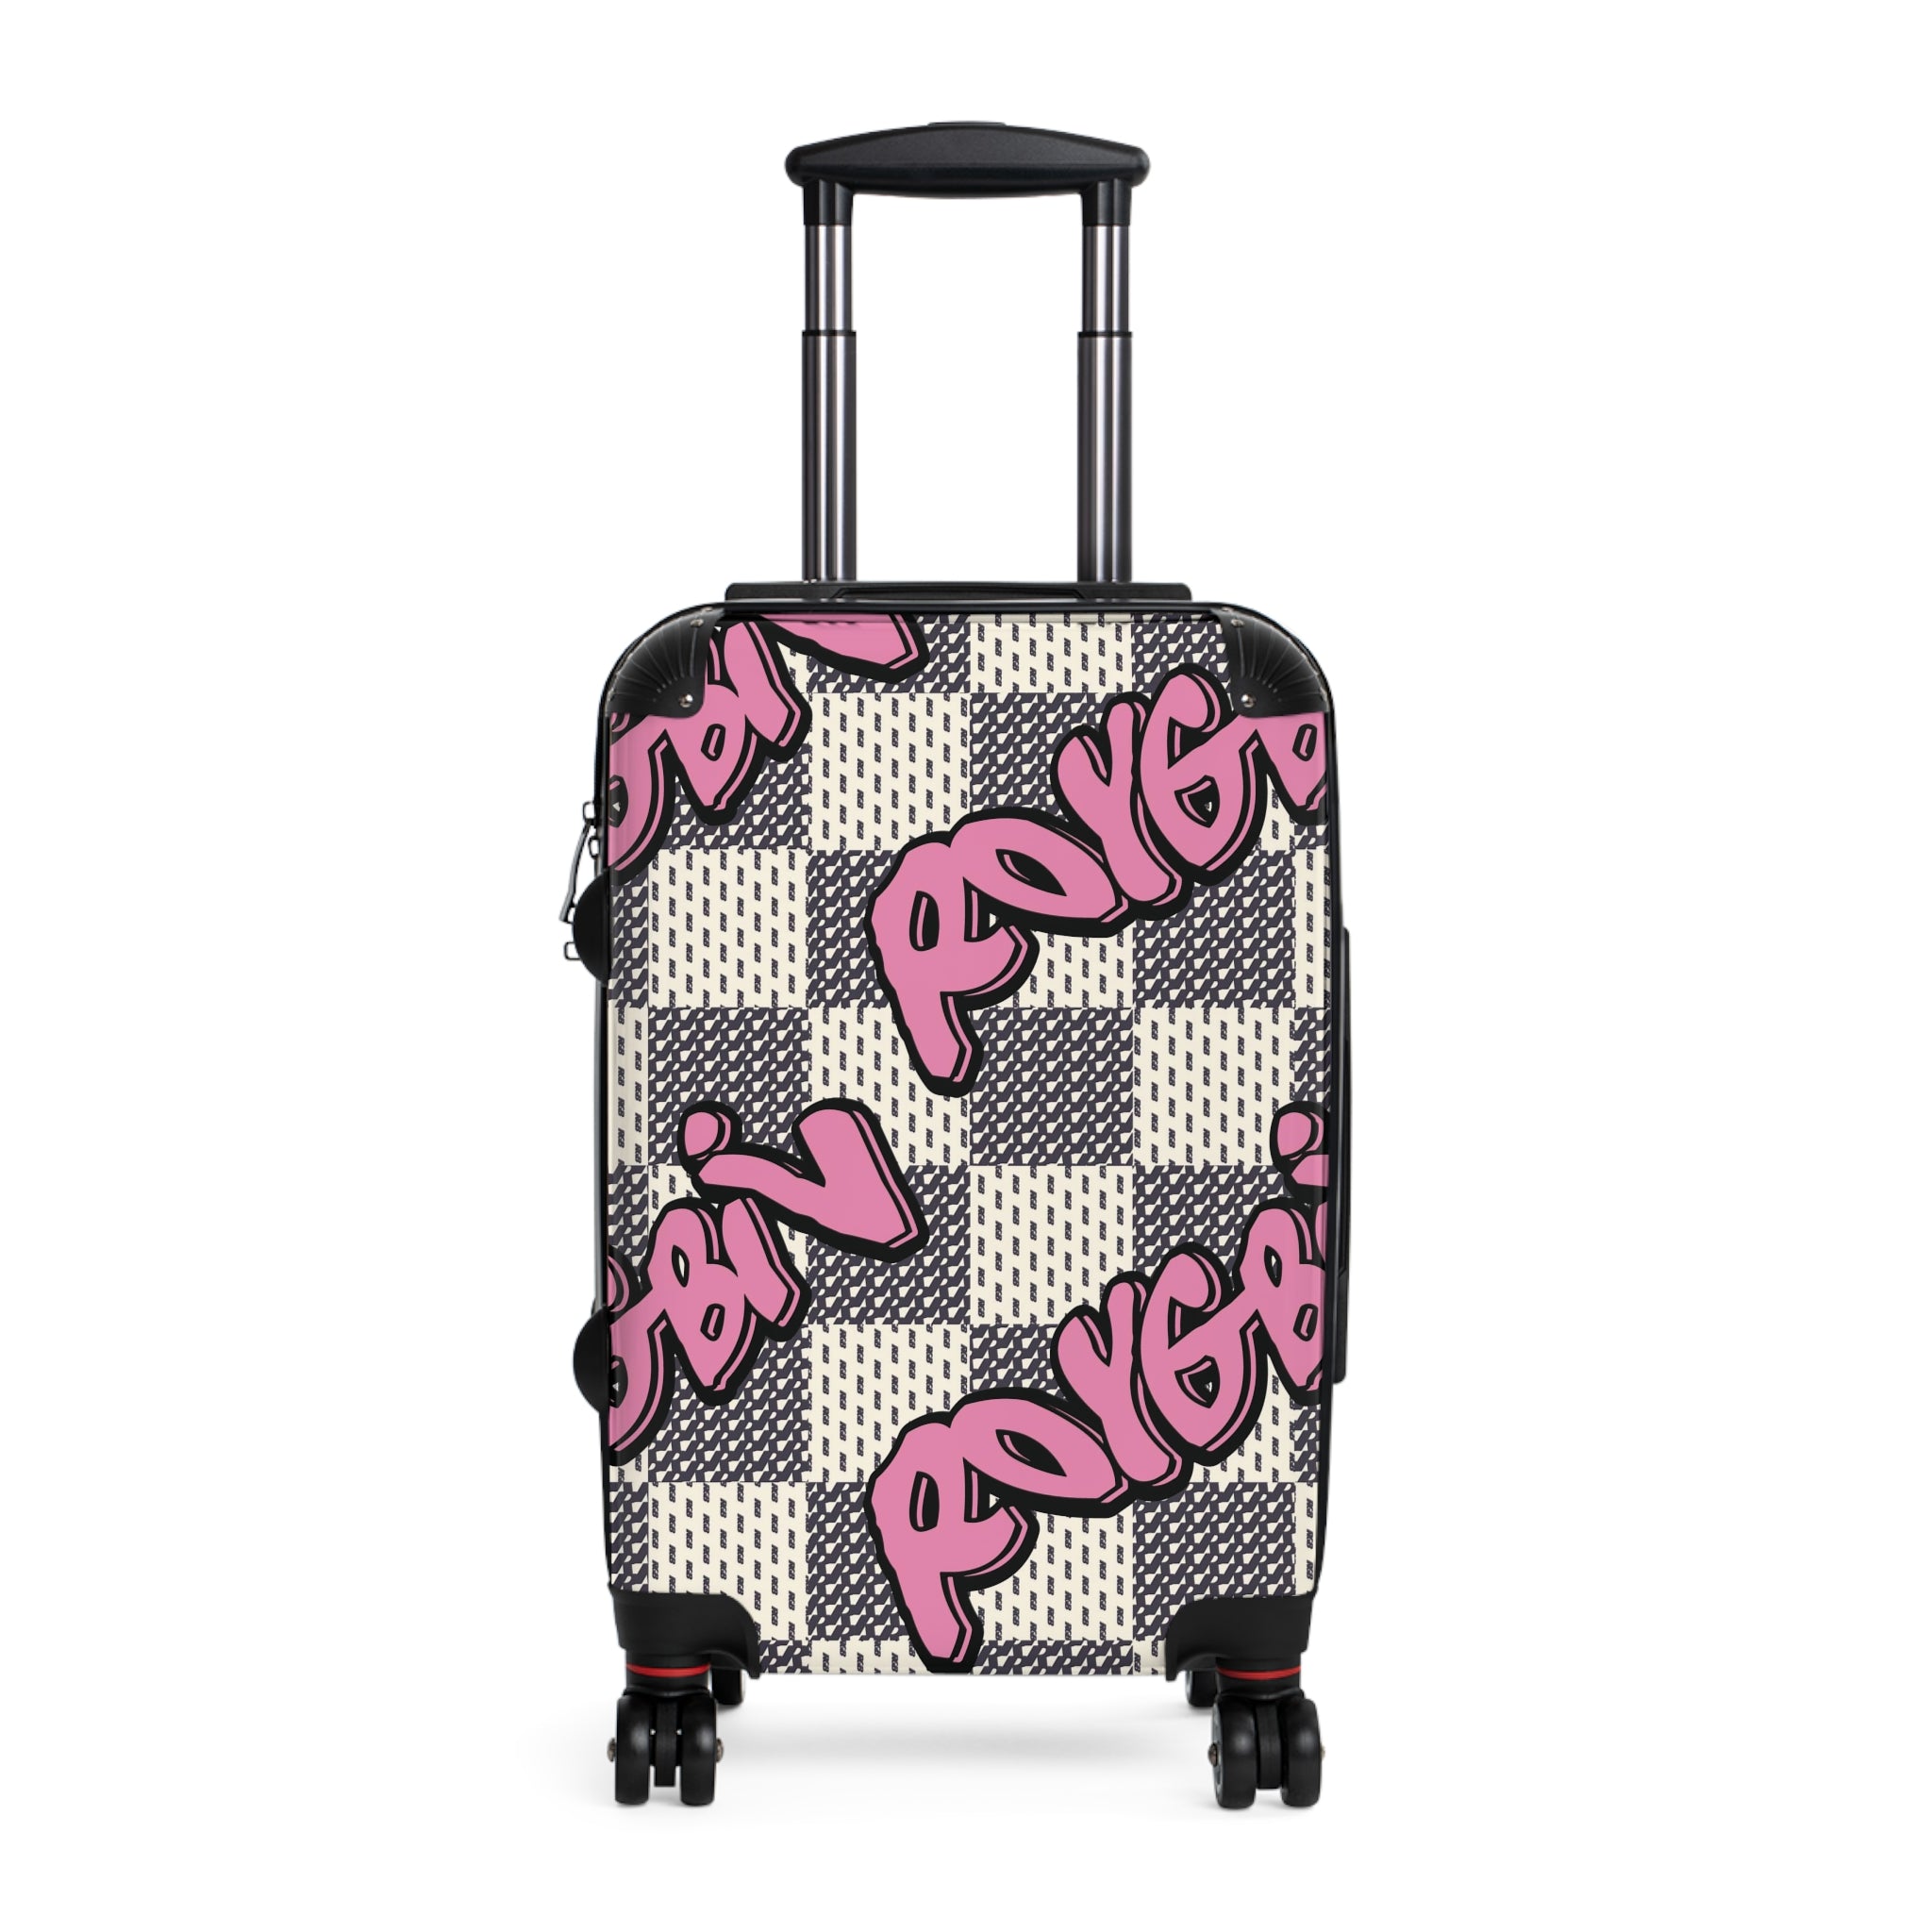 Carry-on Suitcase